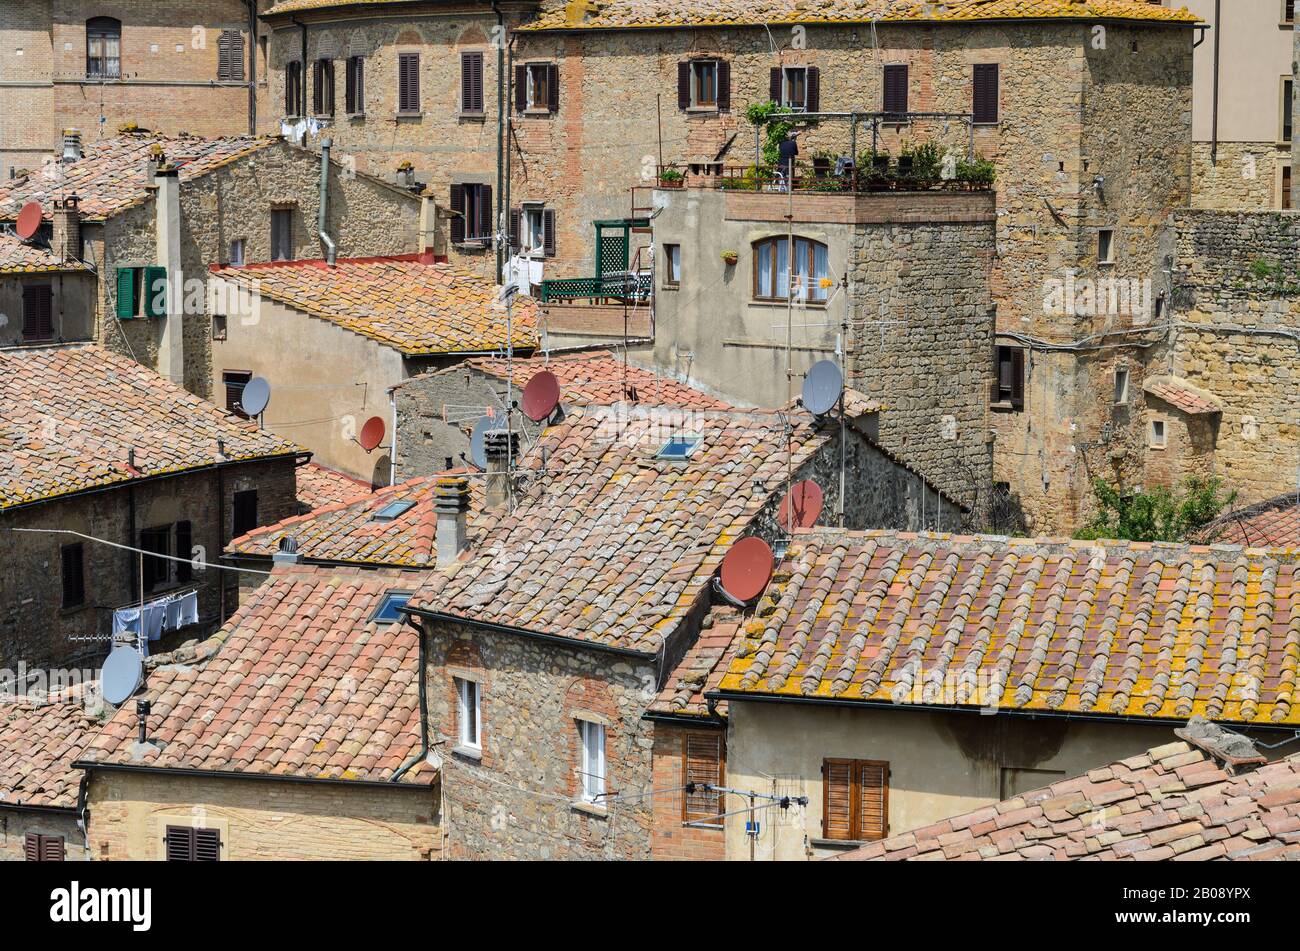 Densely packed houses and rooftops in Volterra in the Tuscany region of Italy, Europe. Stock Photo